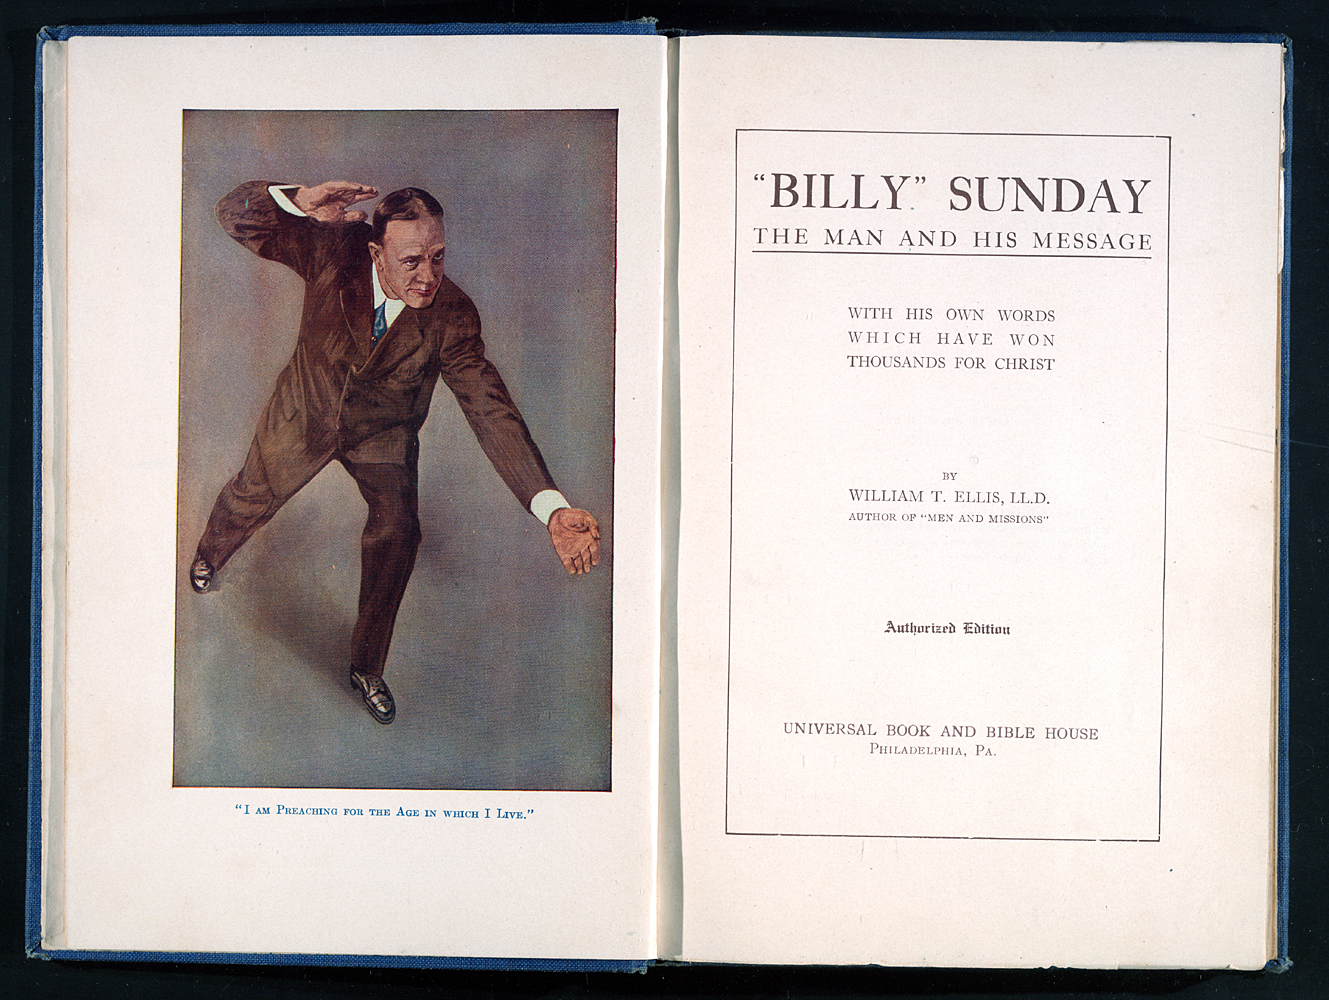 Billy Sunday This Man and His Message Interior Cover with color illustration of Billy Sunday Preaching